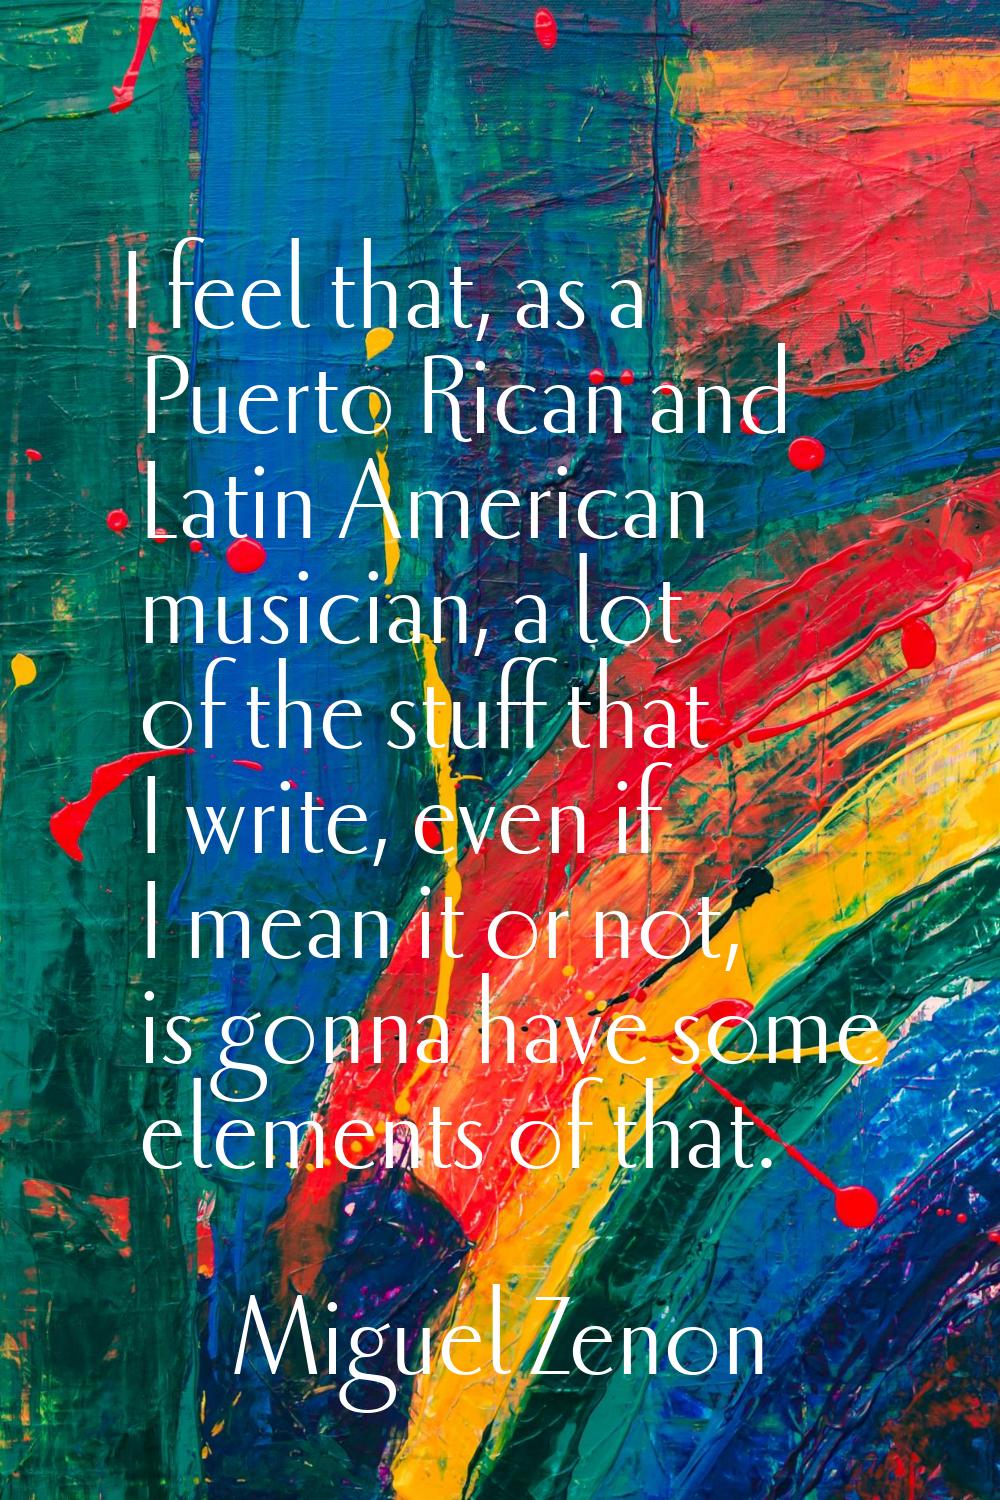 I feel that, as a Puerto Rican and Latin American musician, a lot of the stuff that I write, even i